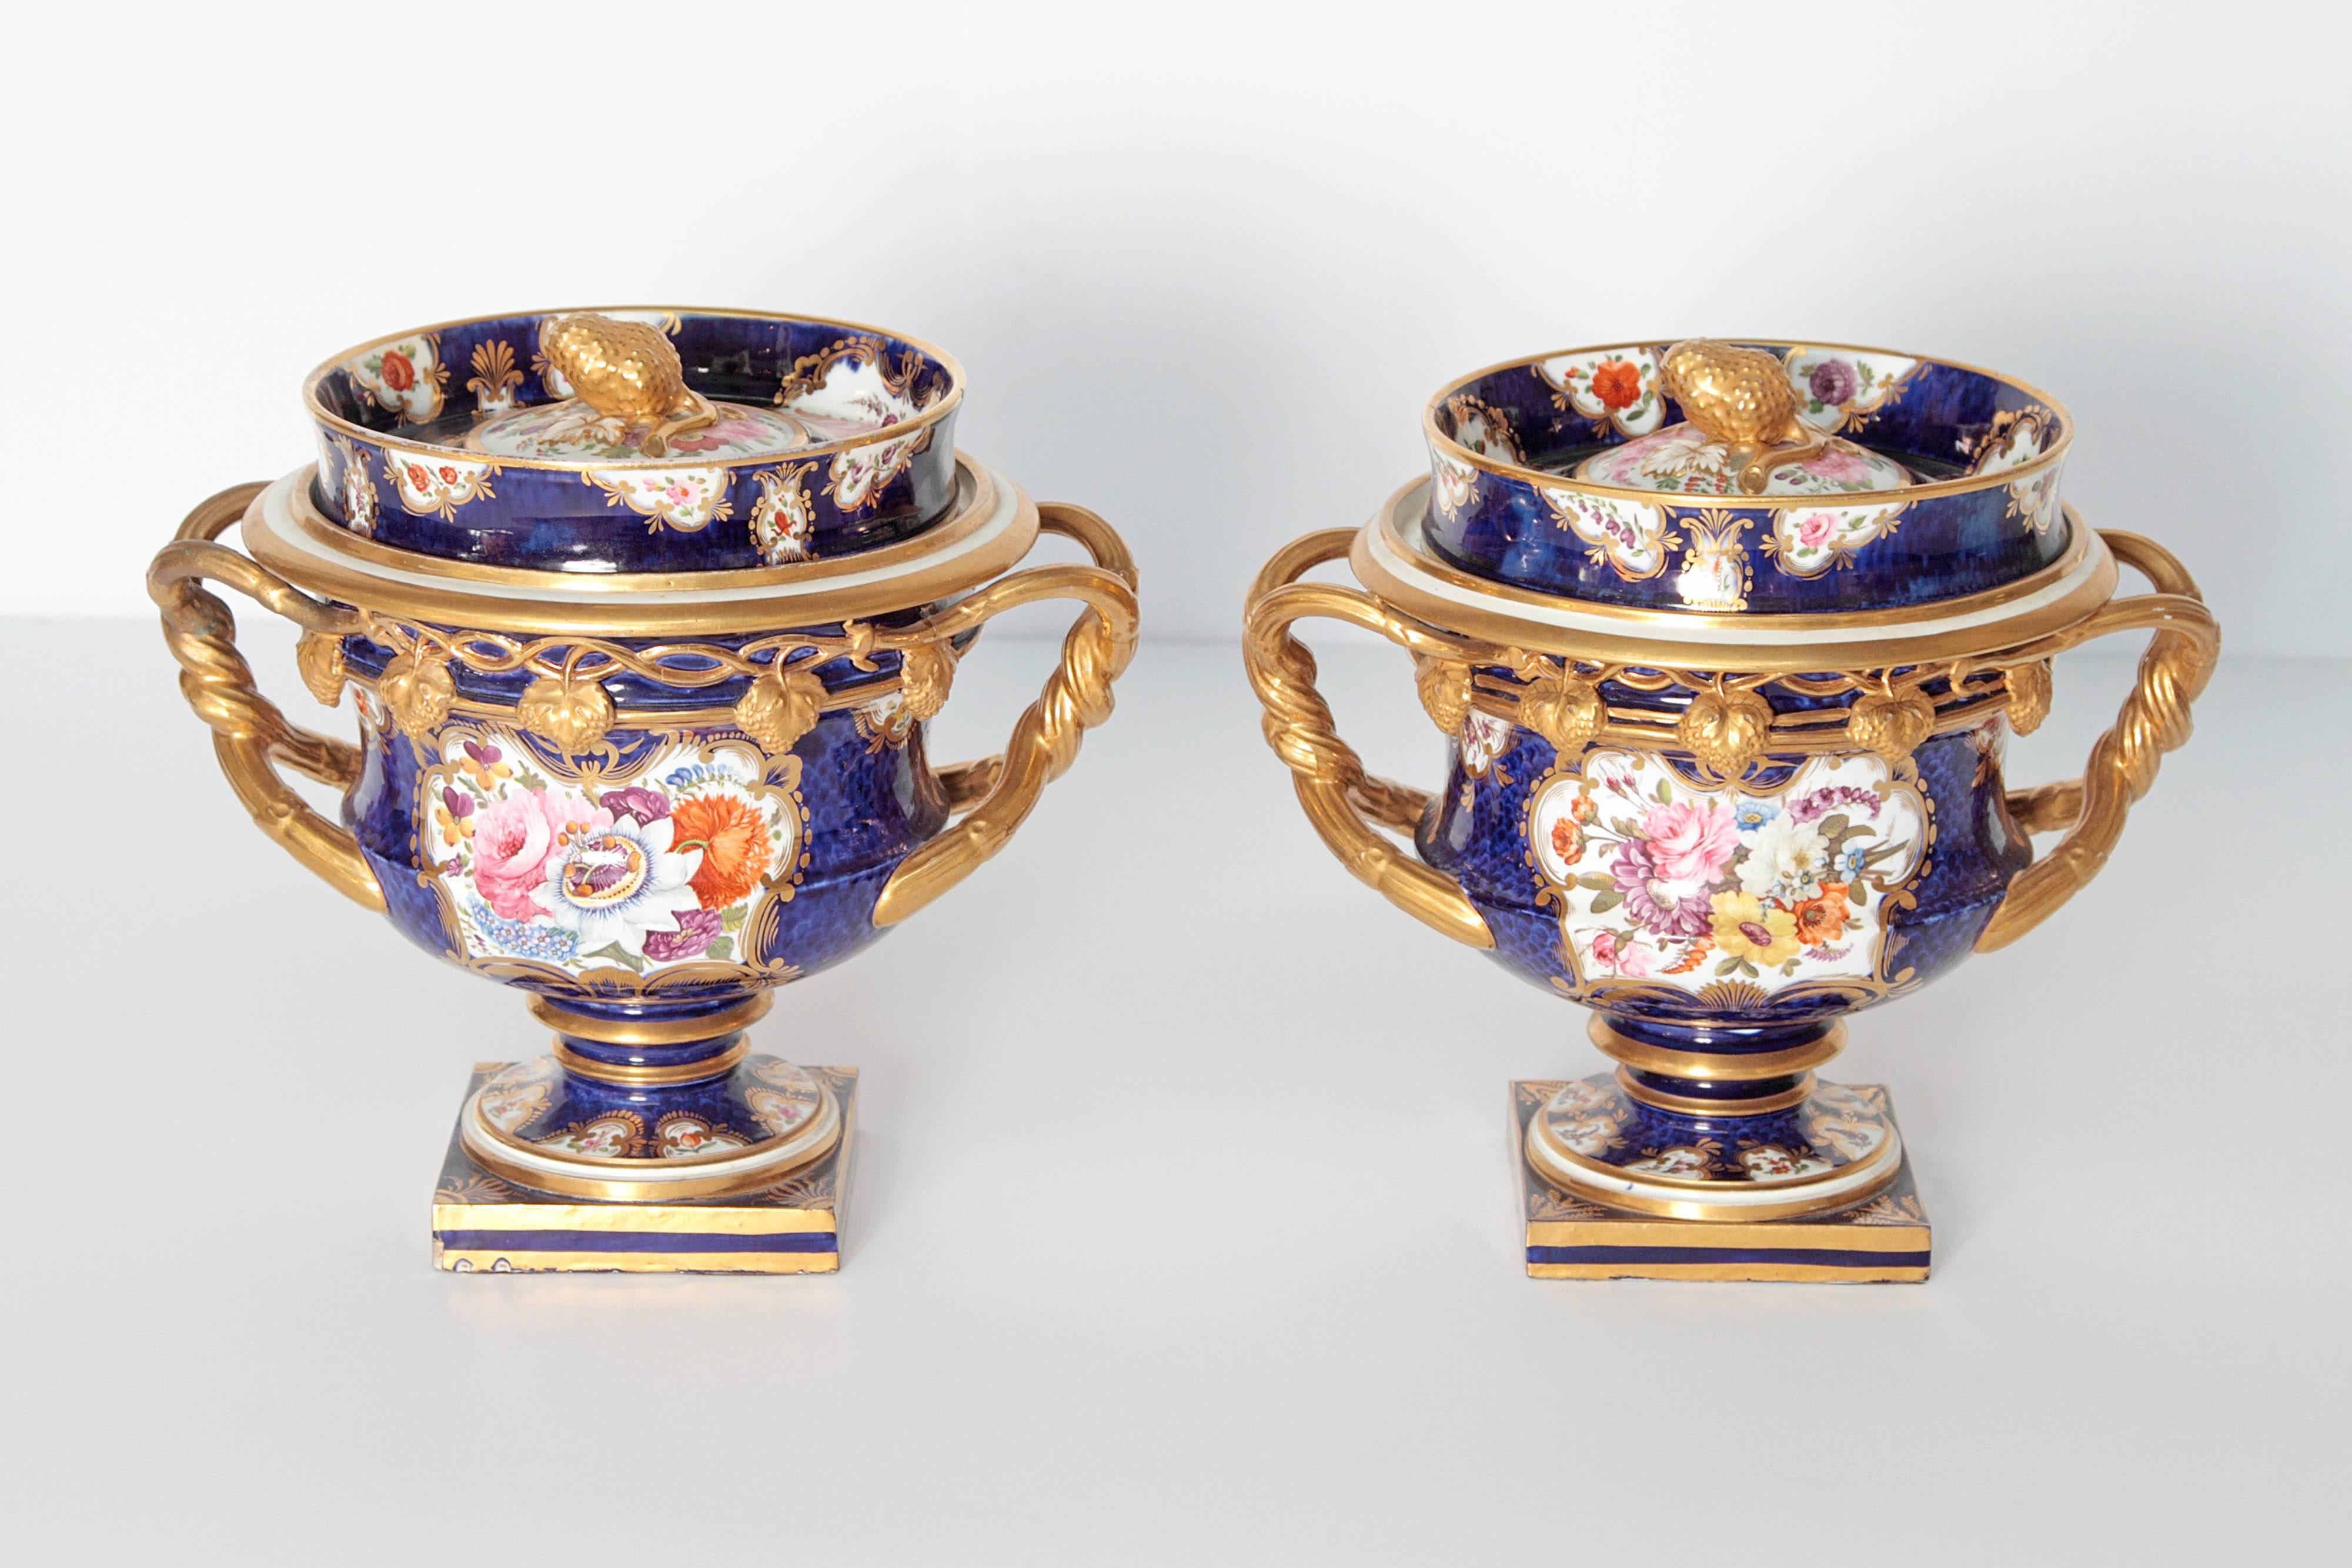 Hand-Painted Pair of 19th Century English Porcelain Fruit Coolers with Covers